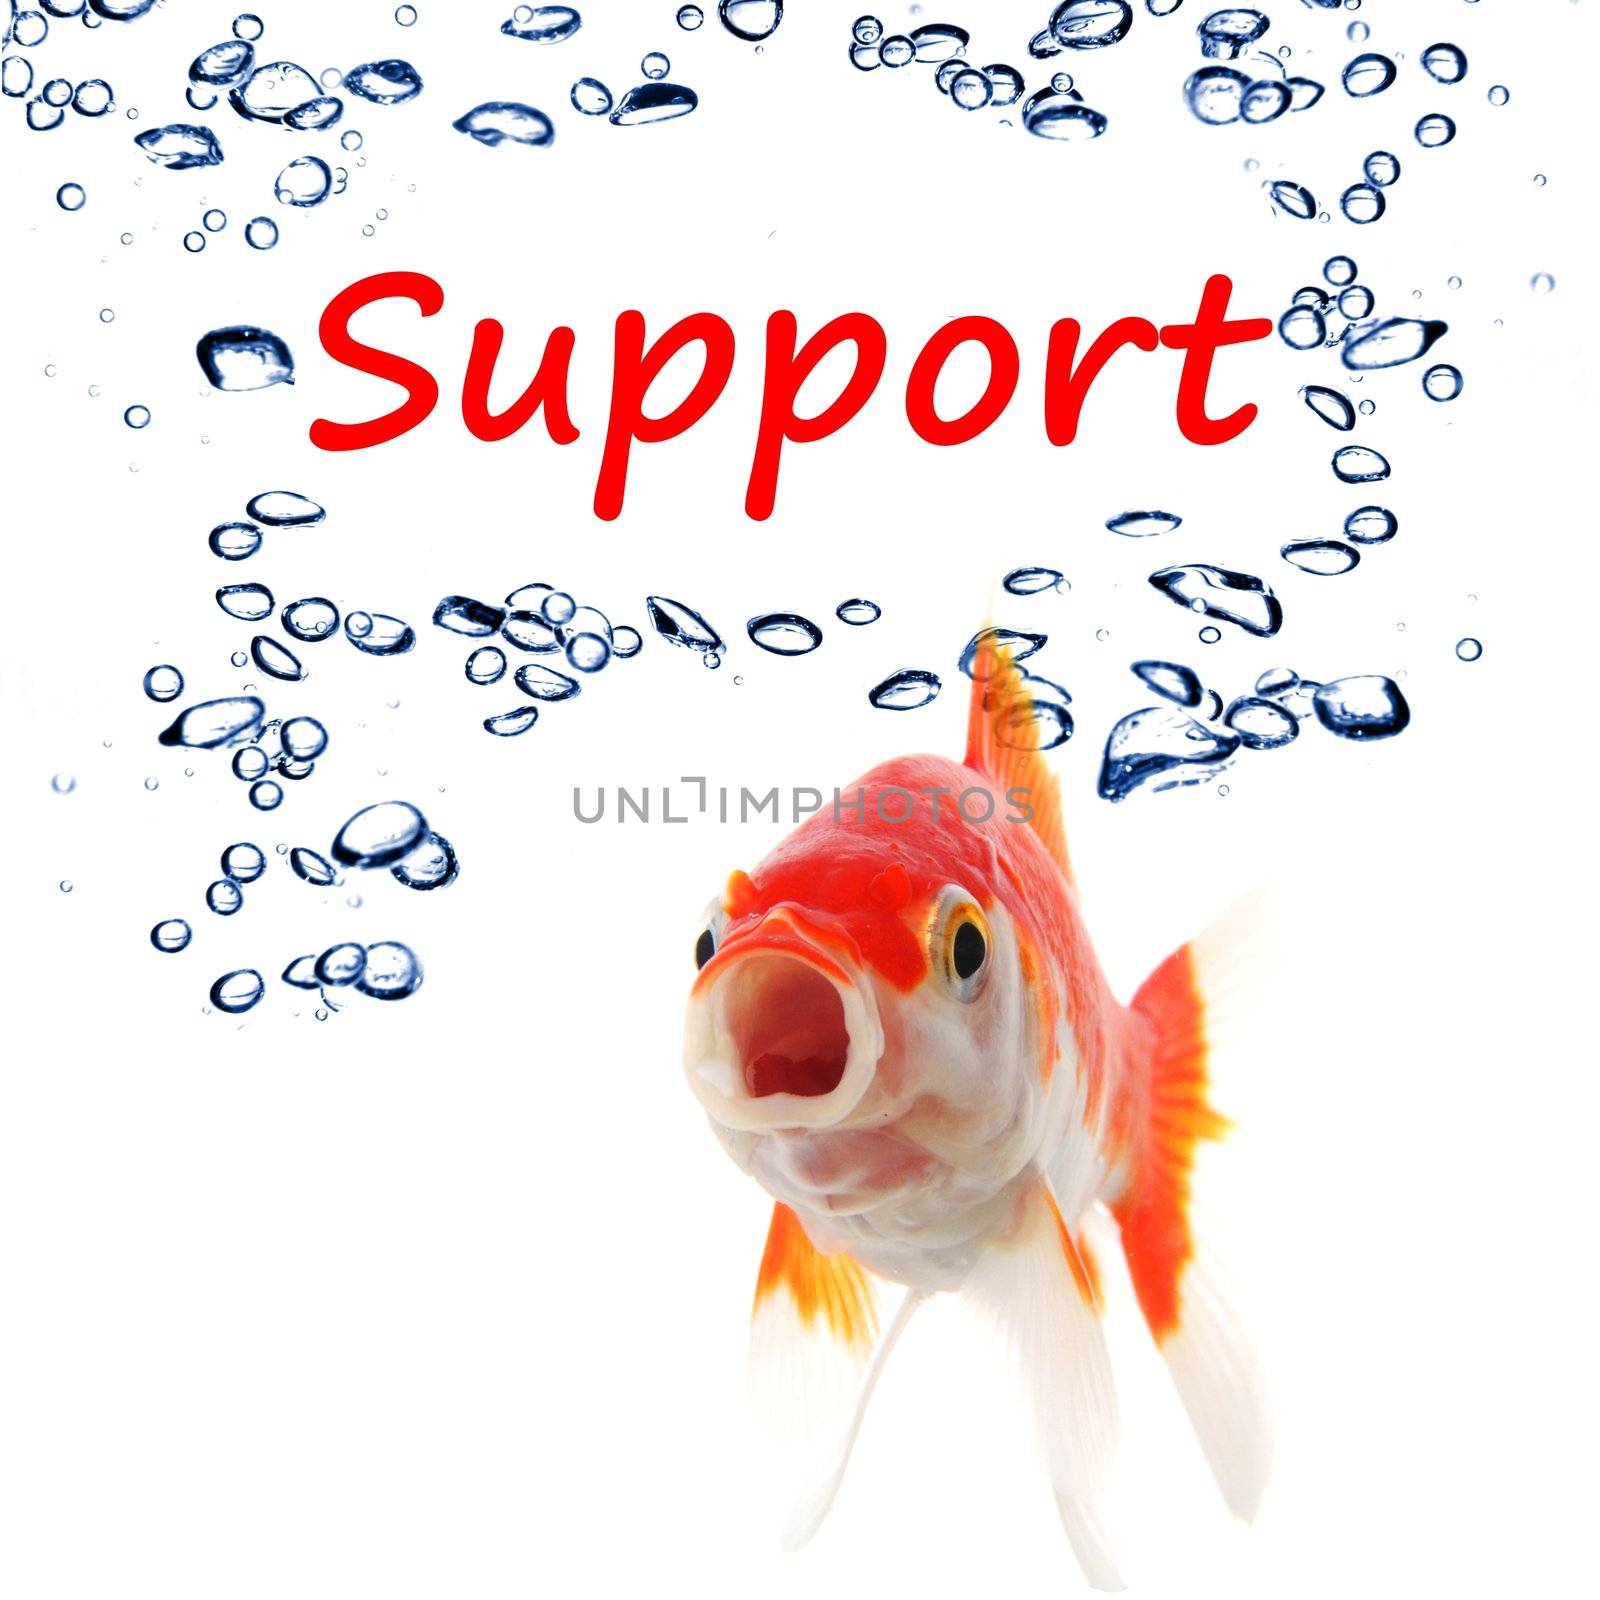 support or contact us concept with goldfish and water bubbles on white